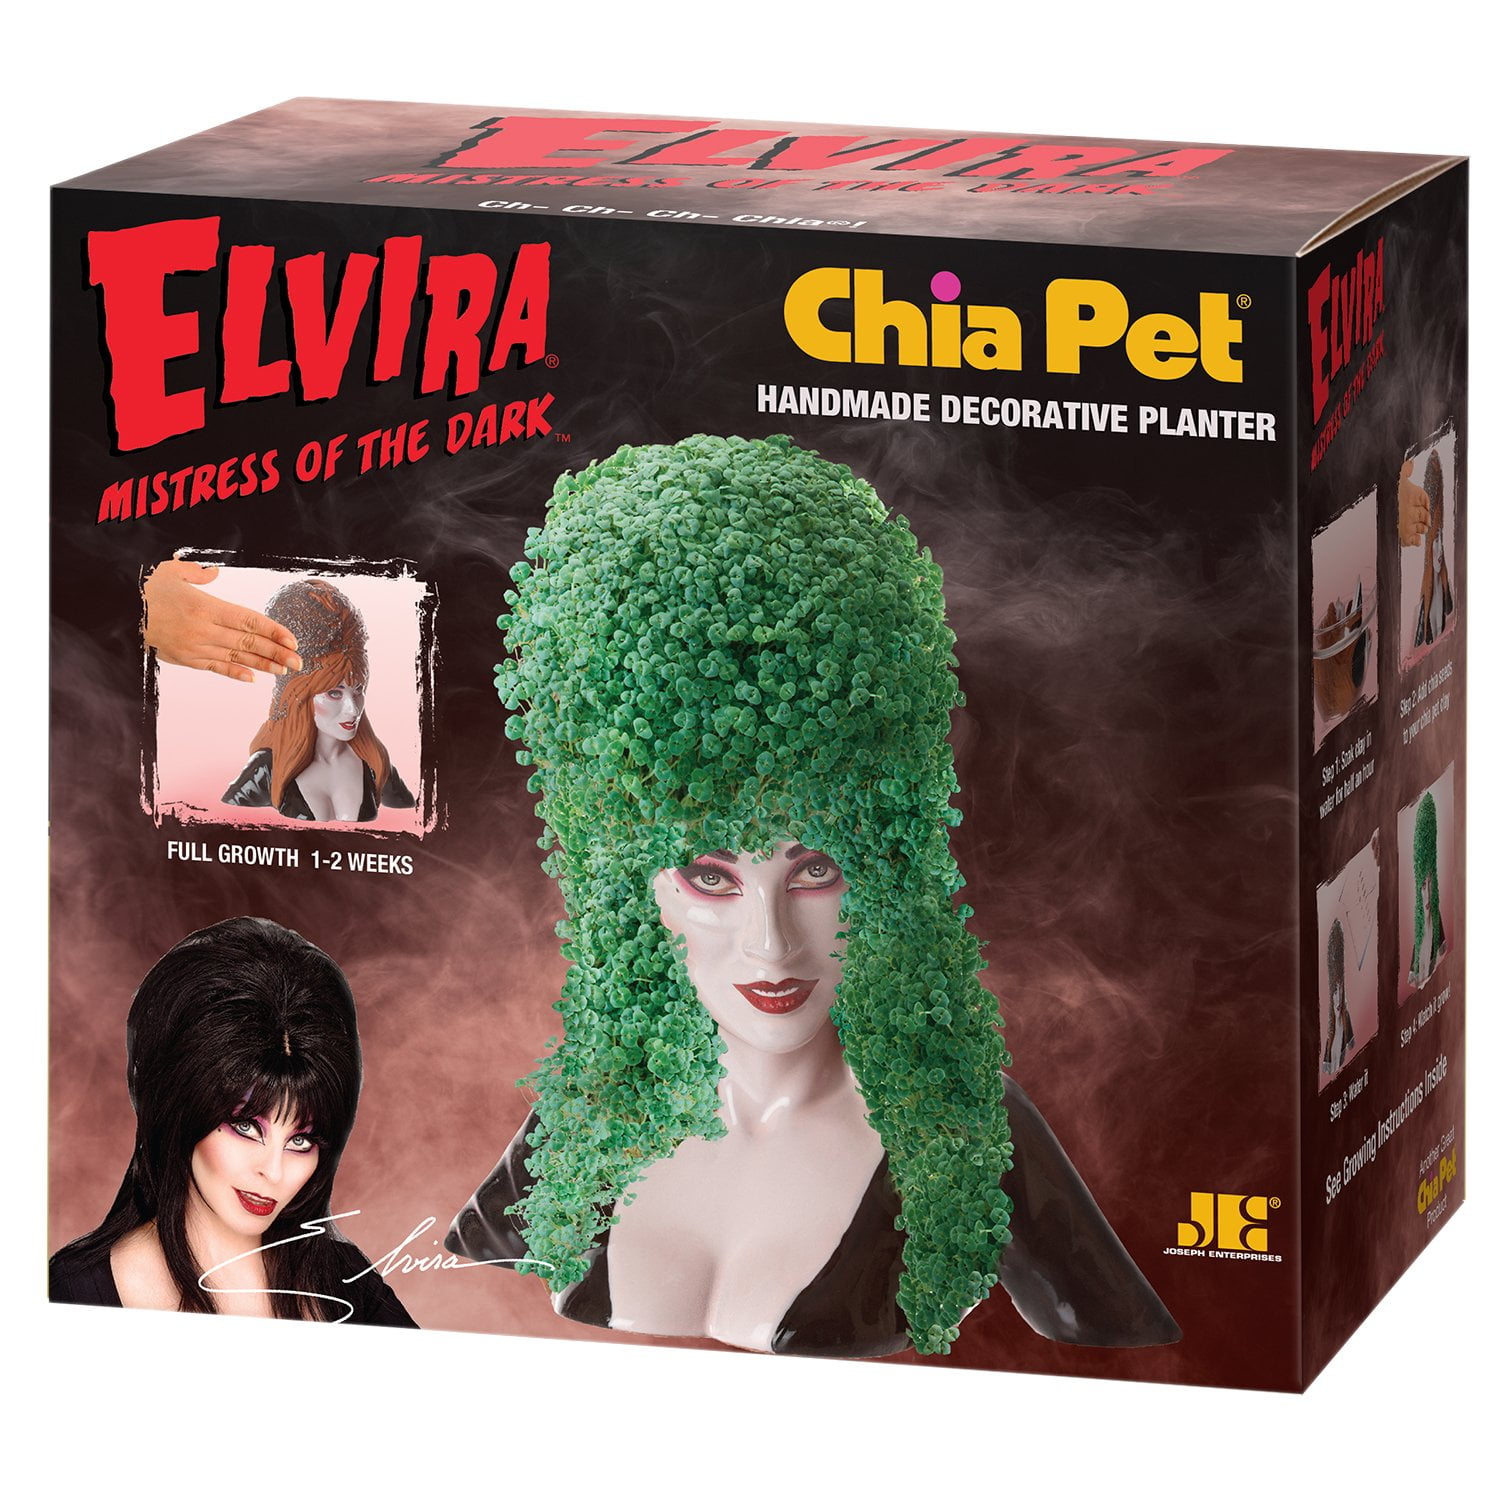 Decorative Pottery Planter Perfect for Any Occasion Novelty Gift Easy to Do and Fun to Grow Chia Pet Elvira with Seed Pack 